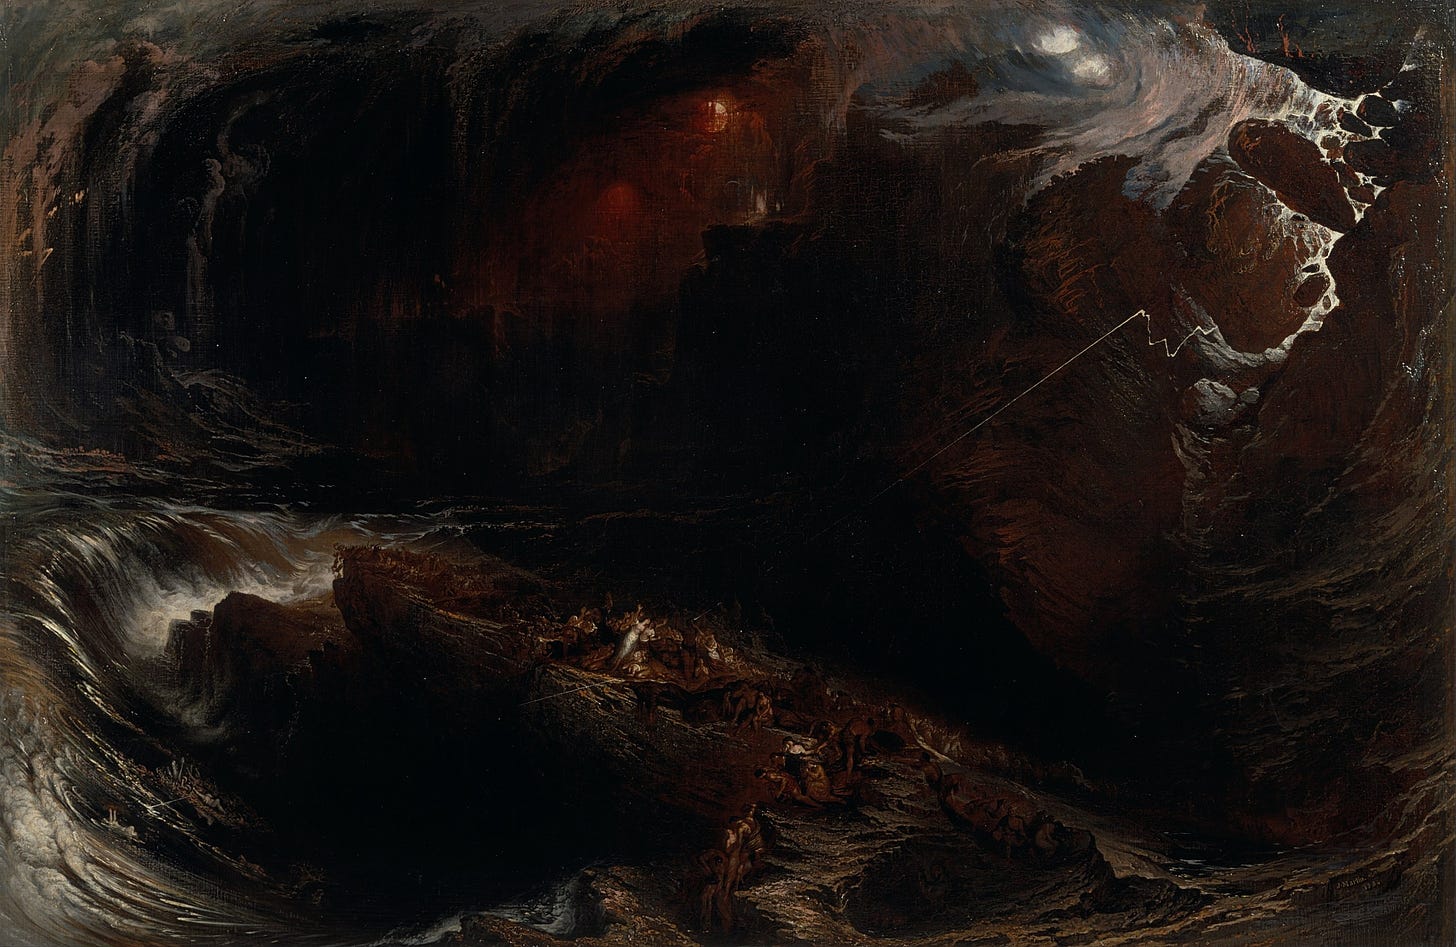 The Deluge (1834). Oil on canvas, 168.3 x 258.4 cm. Yale Center for British Art, New Haven, Connecticut